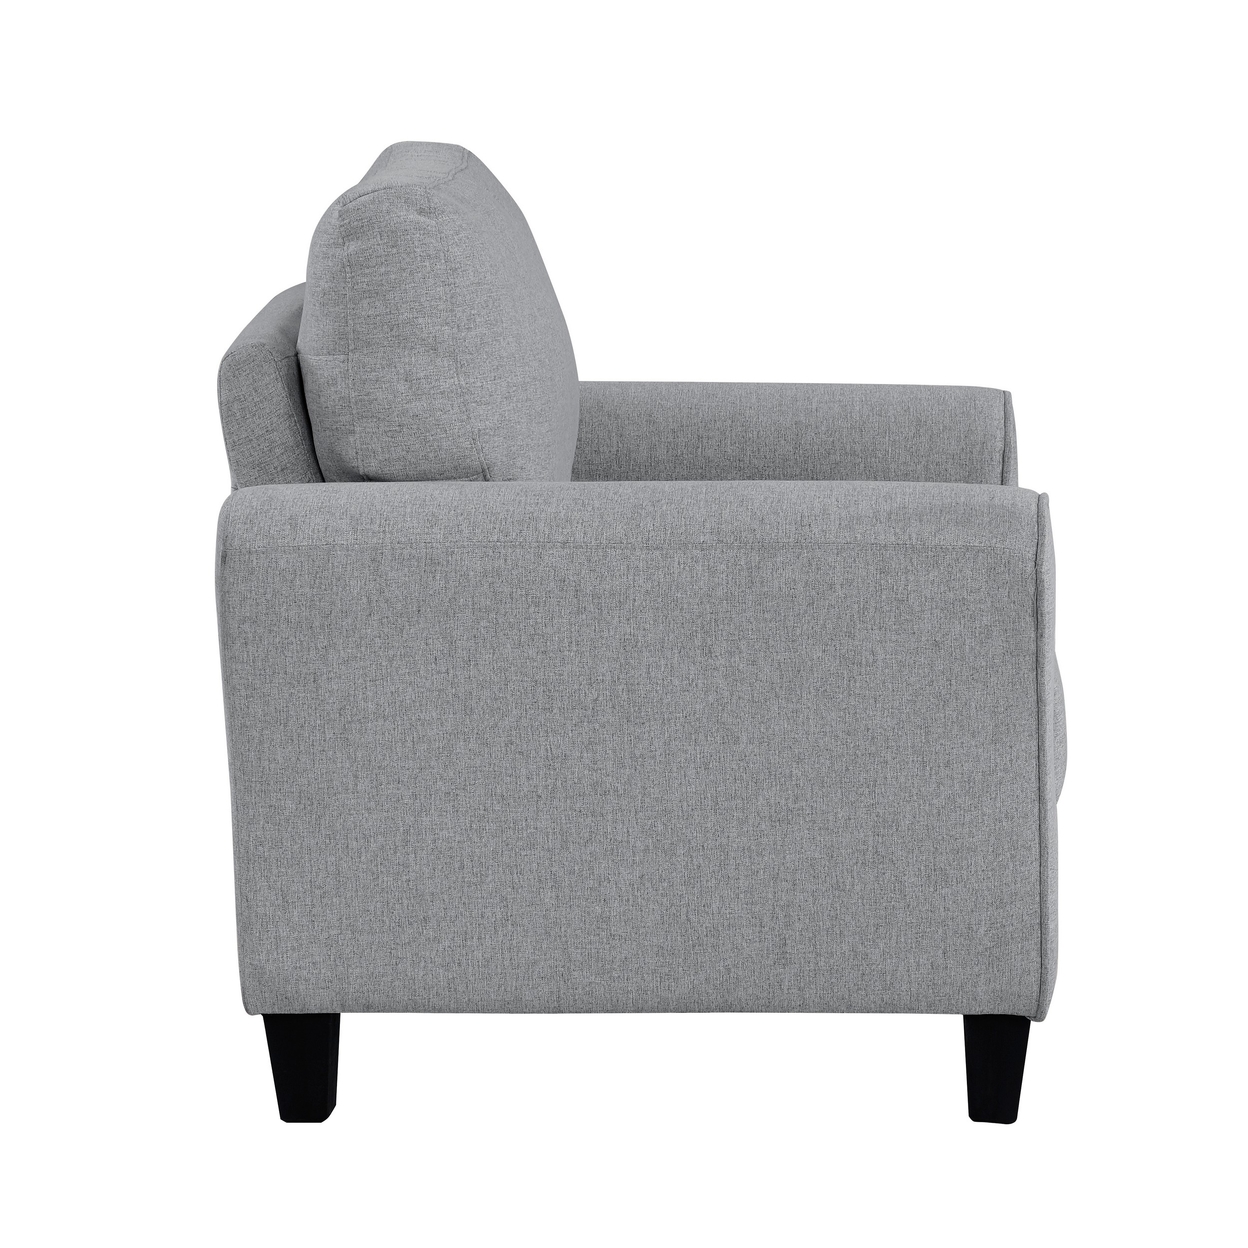 Engi 37 Inch Accent Chair, Smooth Gray Polyester, Attached Back Cushion- Saltoro Sherpi